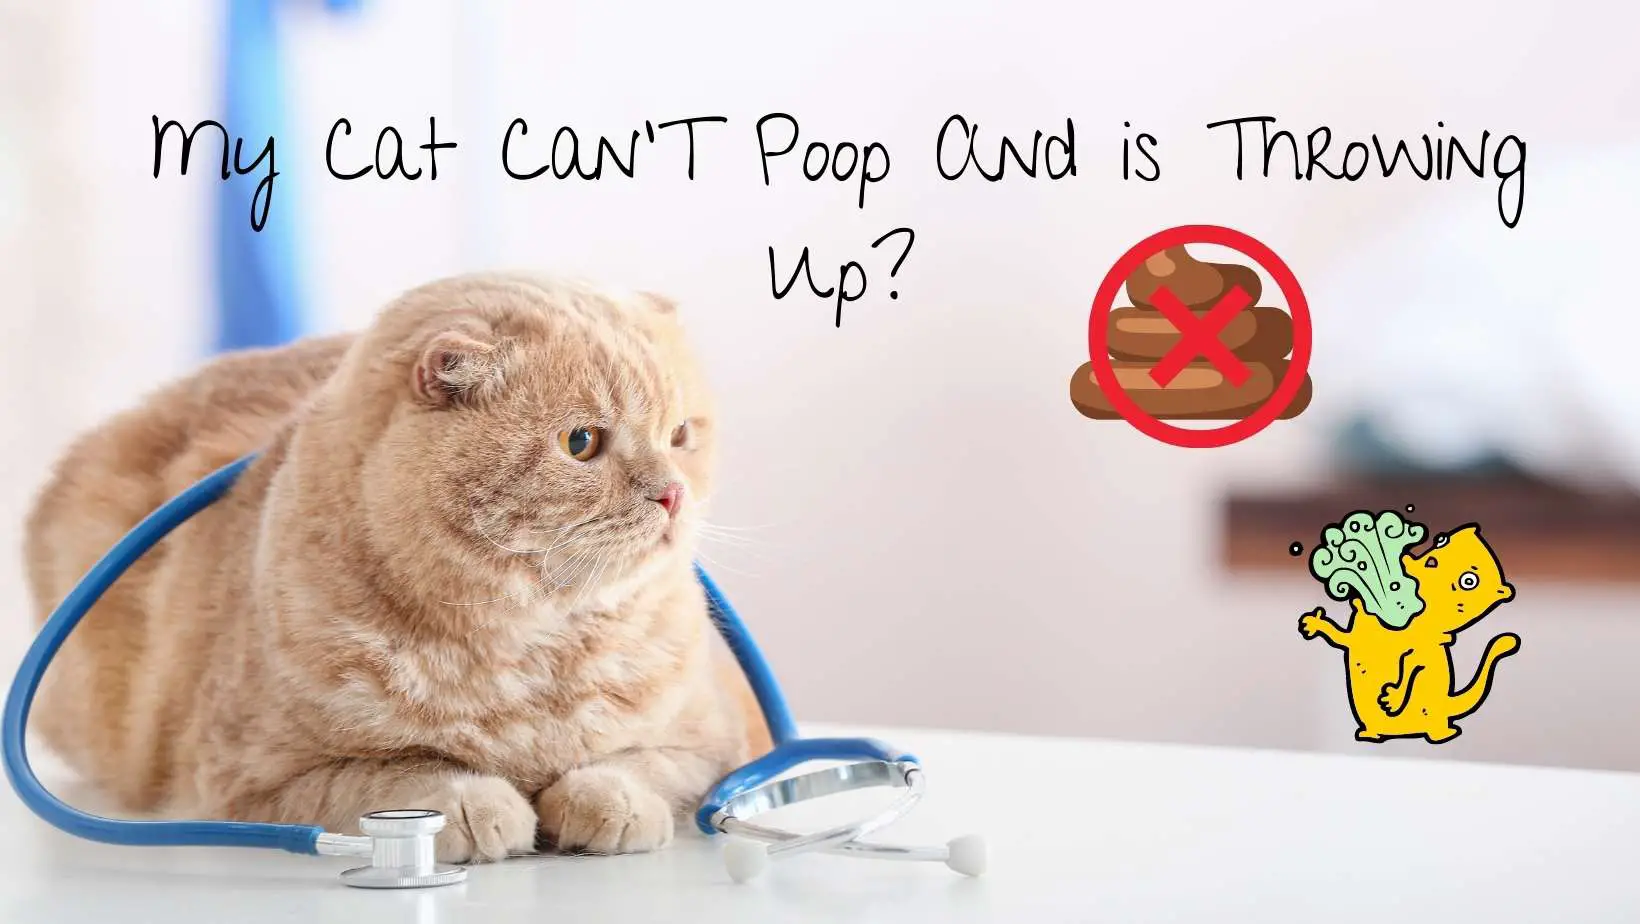 My Cat Can't Poop And is Throwing Up?